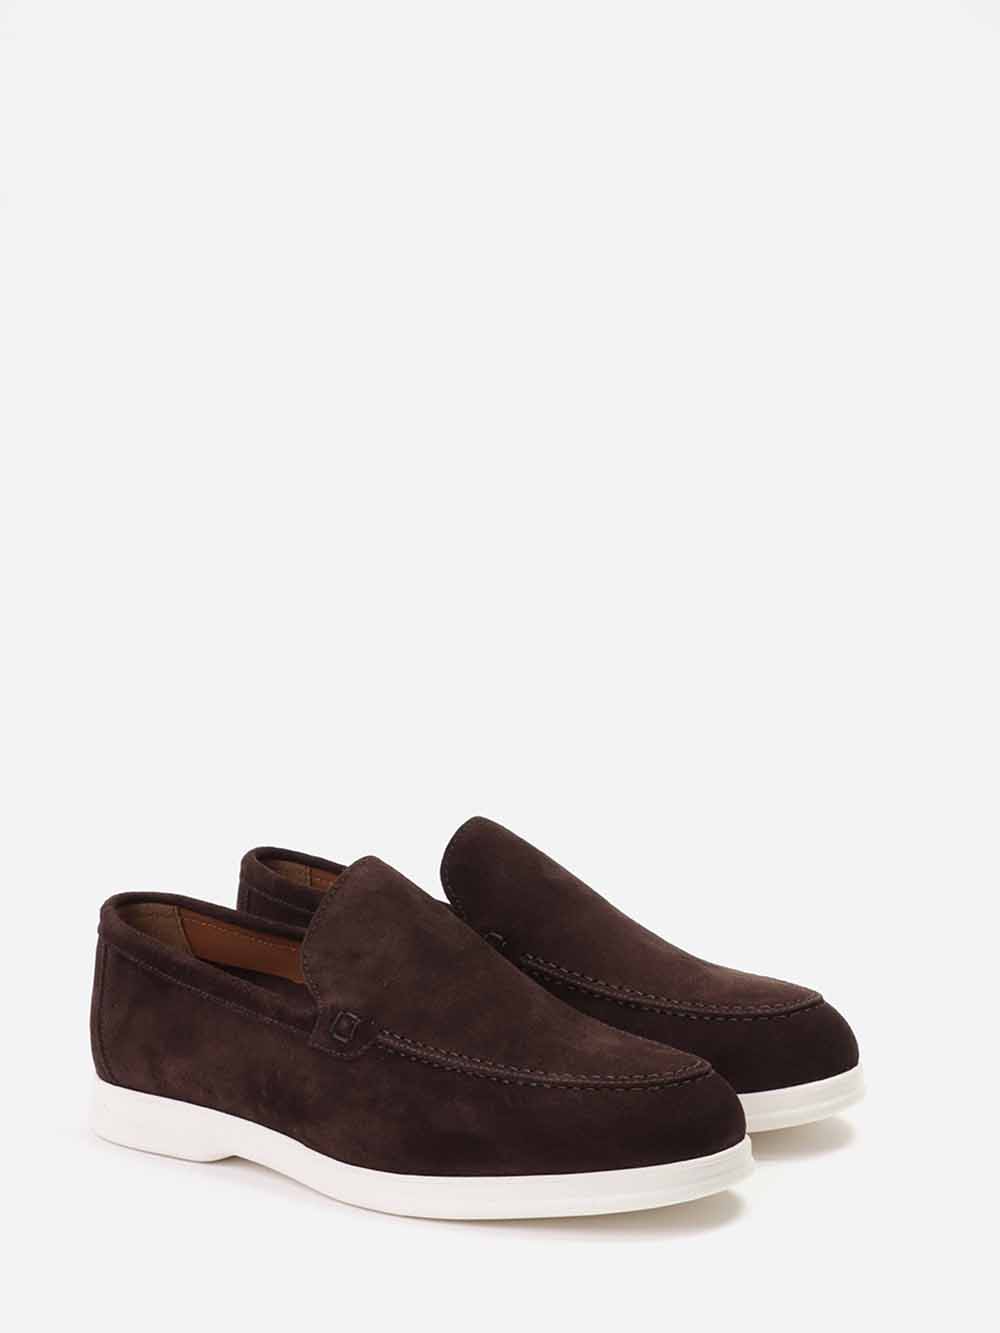 Terre moccasins